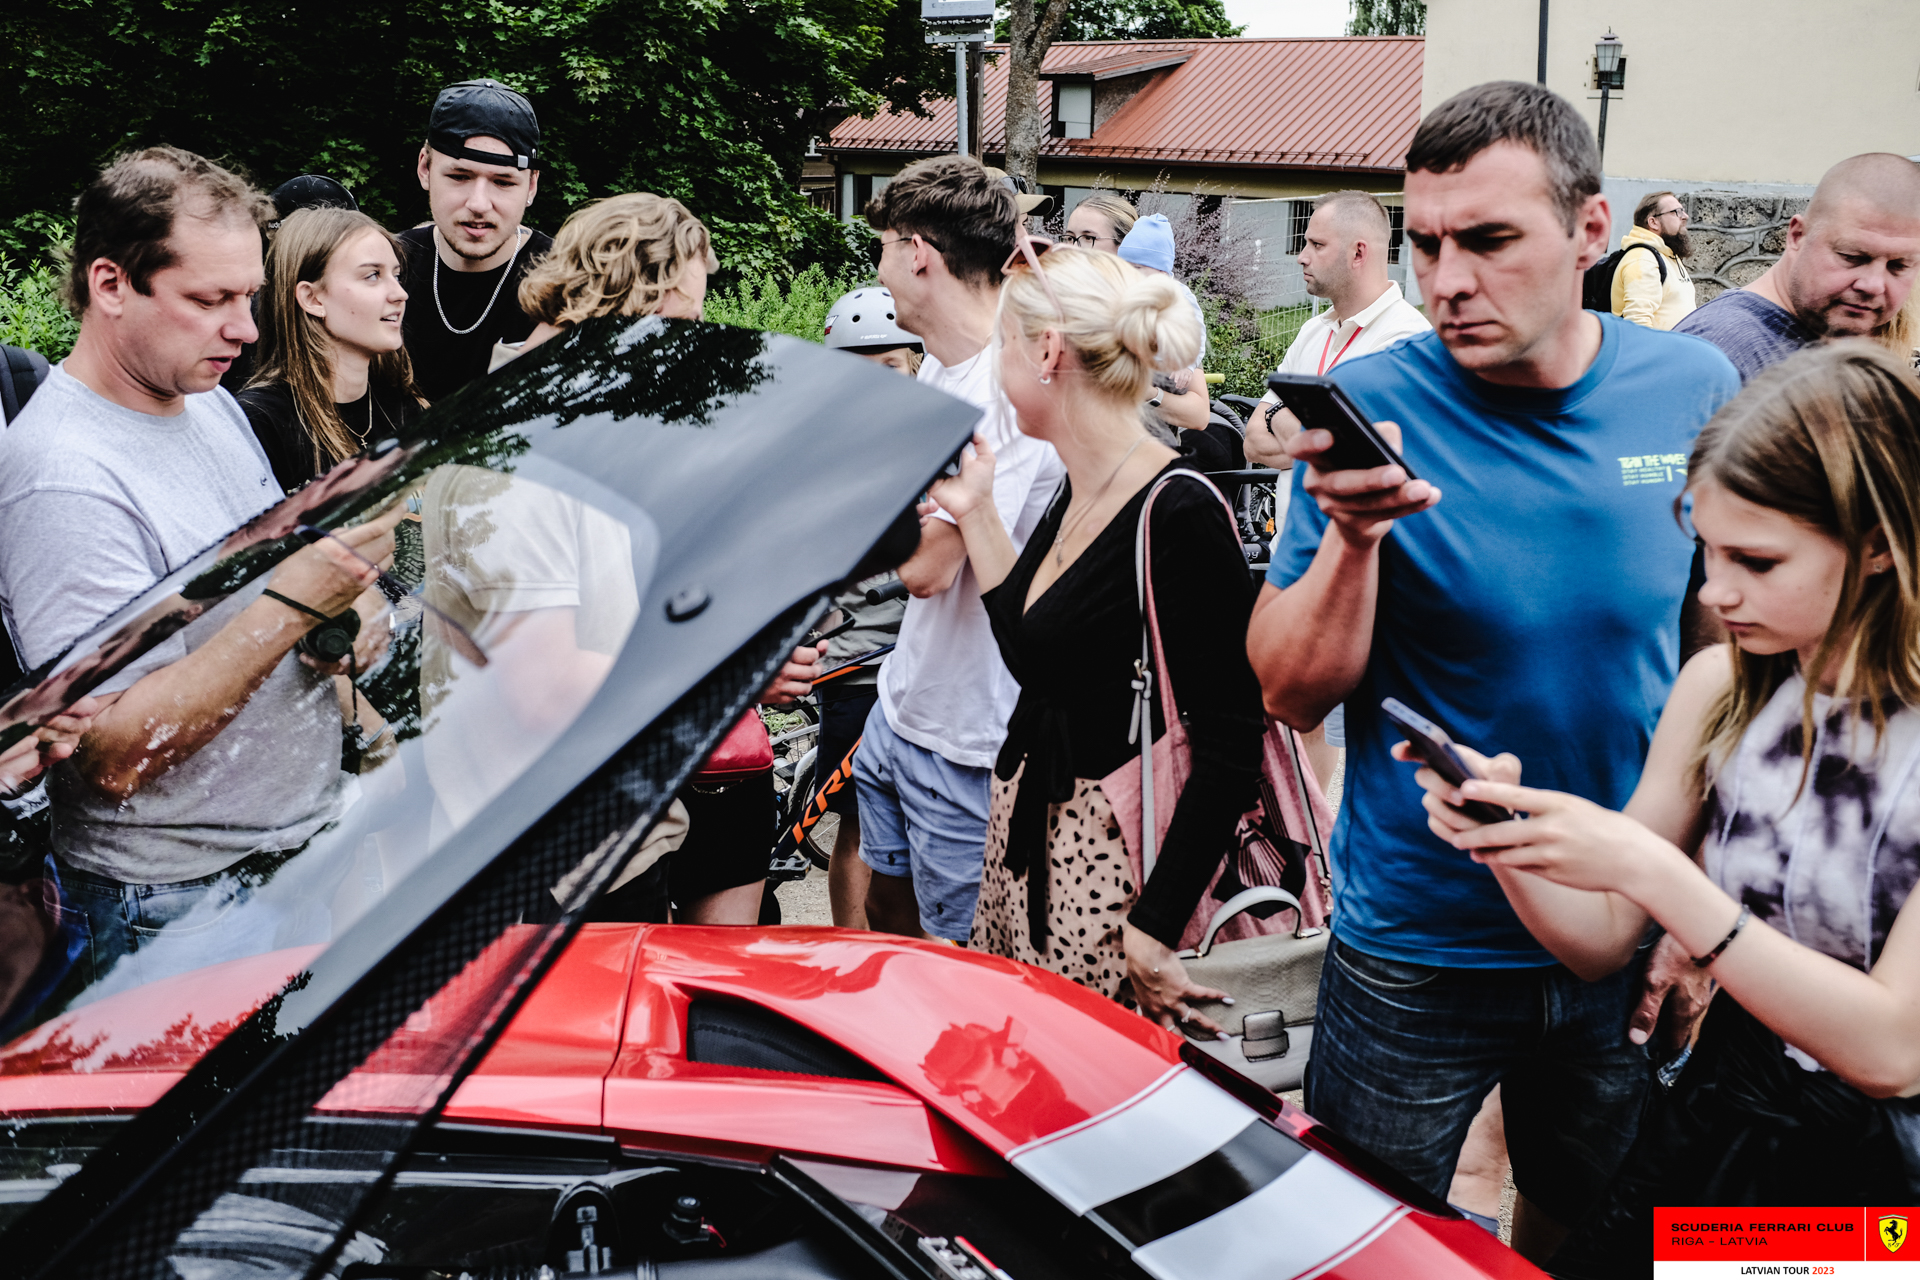 Cesis gathers in Pils Laukums to welcome the Ferrari tour with great affection.